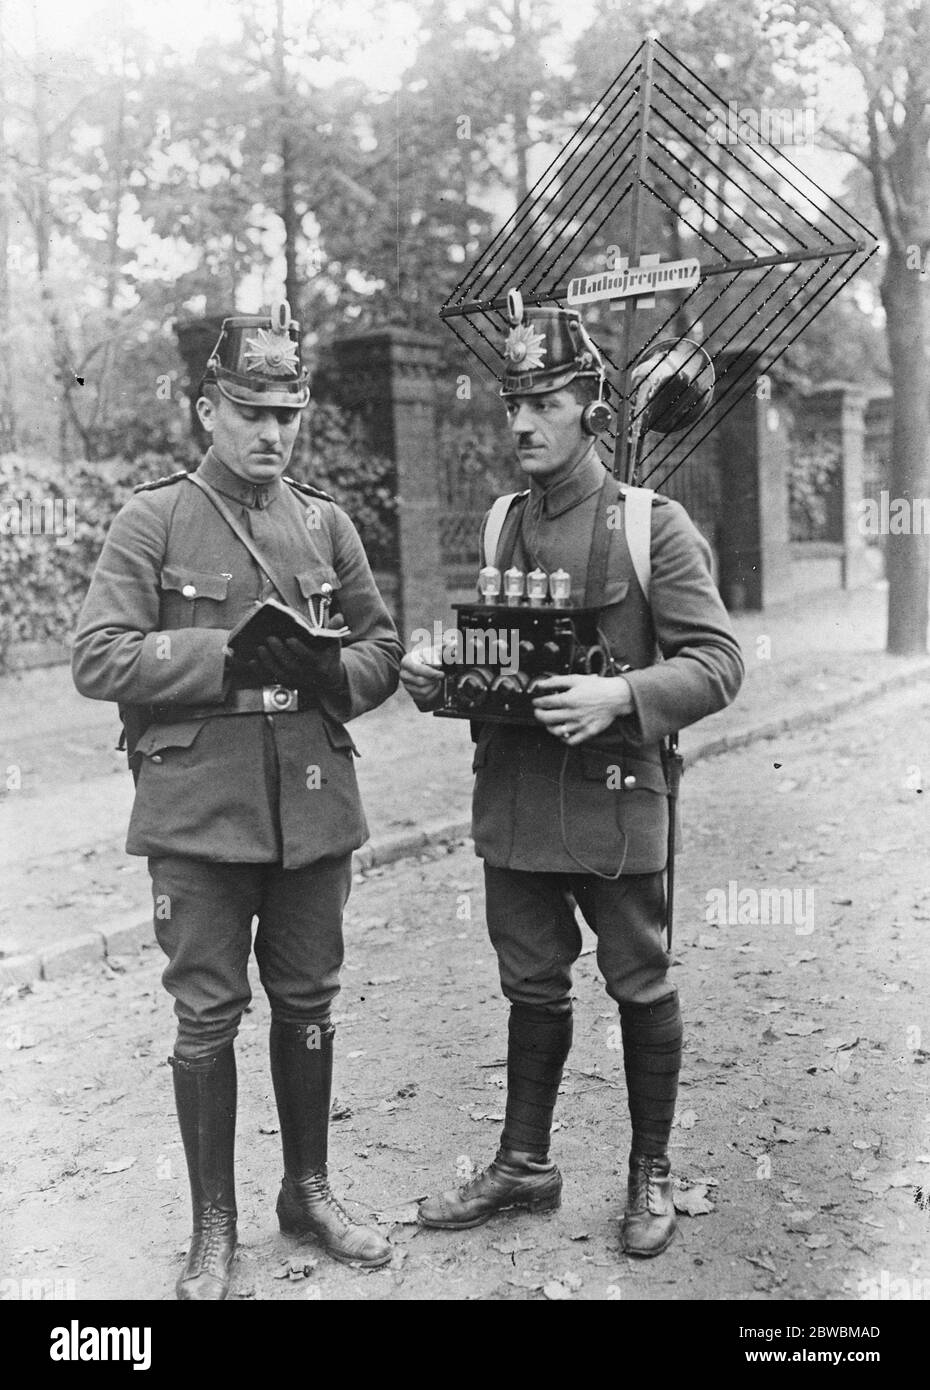 Walking police wireless receiving and transmission station . Quick response to all calls for assistance In order that calls for aid and reinforcements may be quickly responded to the instructions issued without delay , patrolling police in Berlin have been equipped with compete wireless receiving and transmission stations. The photo shows a wireless policeman relaying instructions to another officer 26 October 1923 Stock Photo